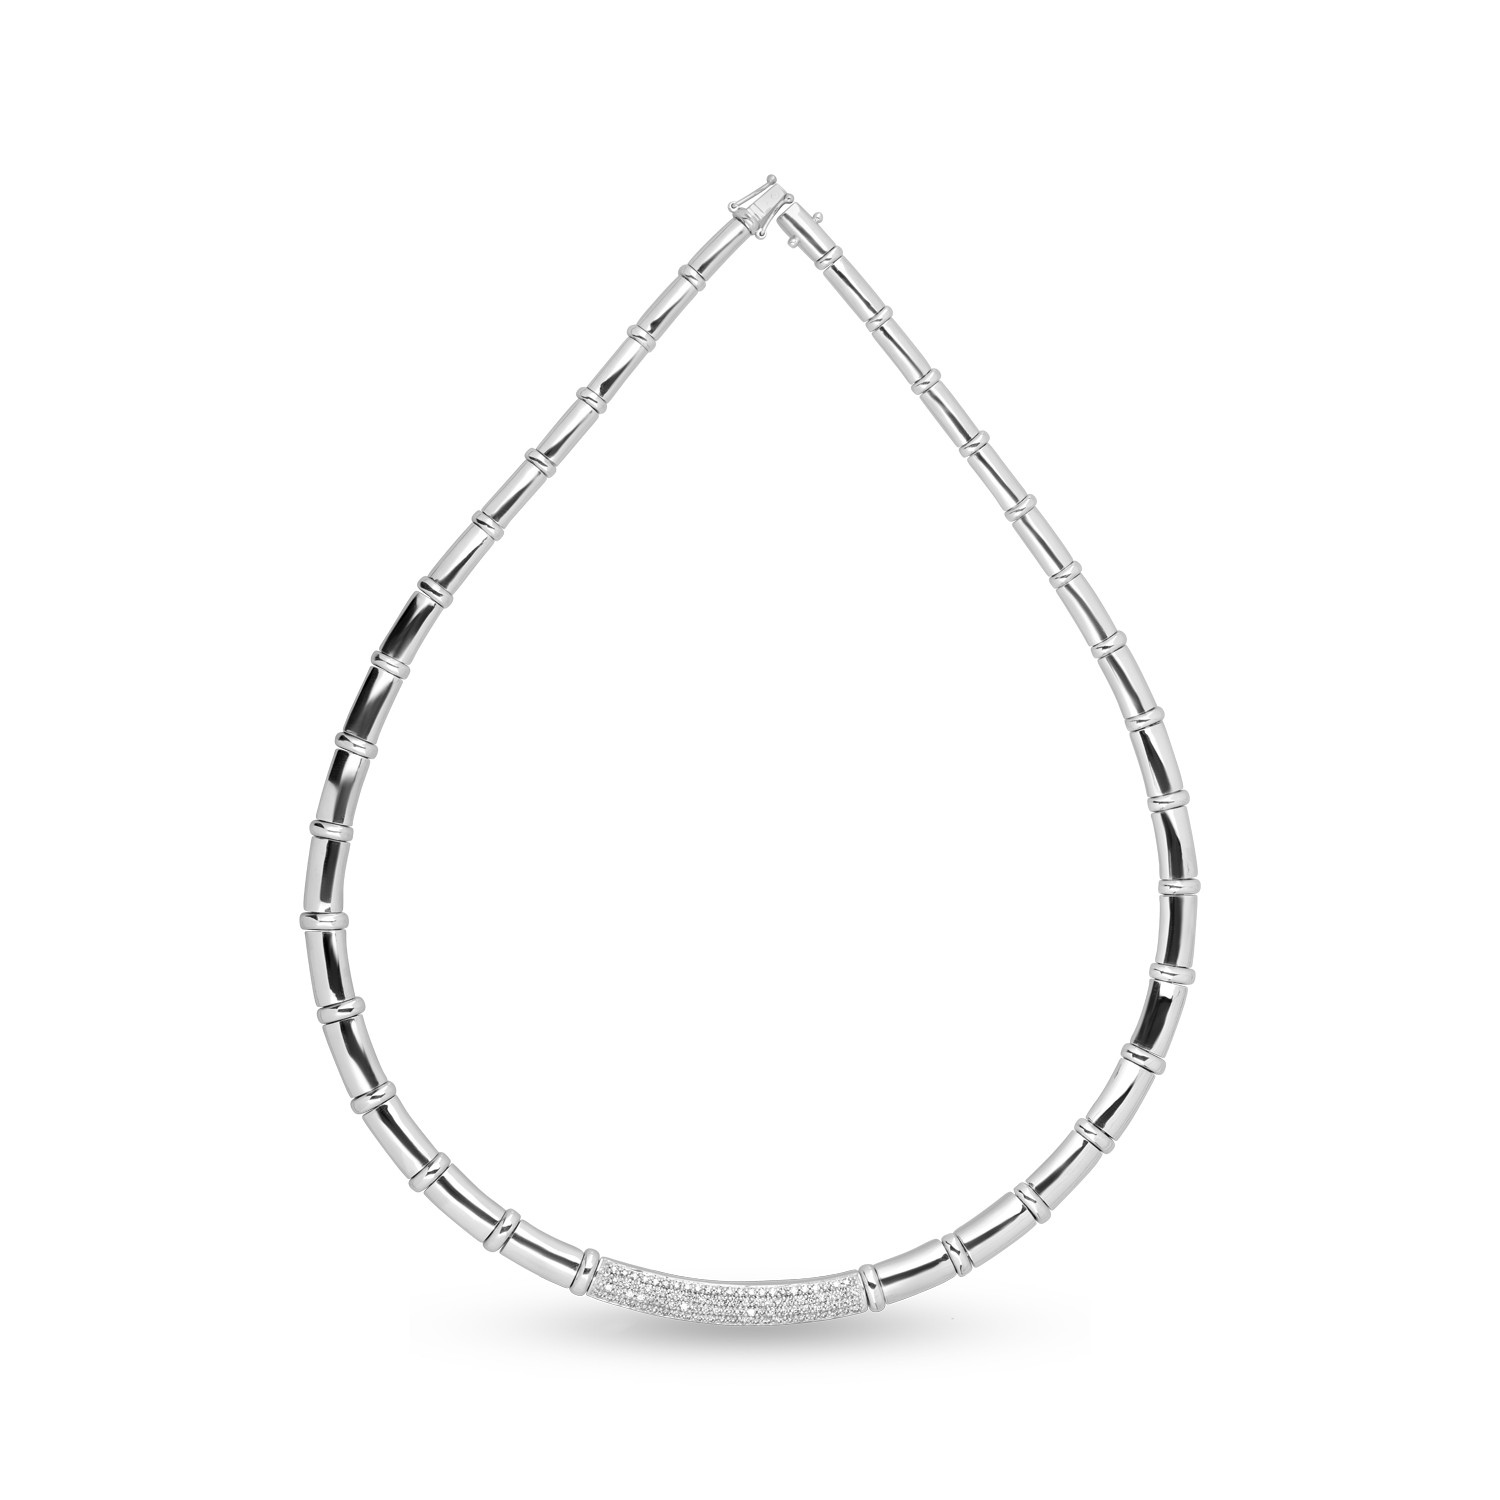 14K white gold necklace with 1.46ct diamonds